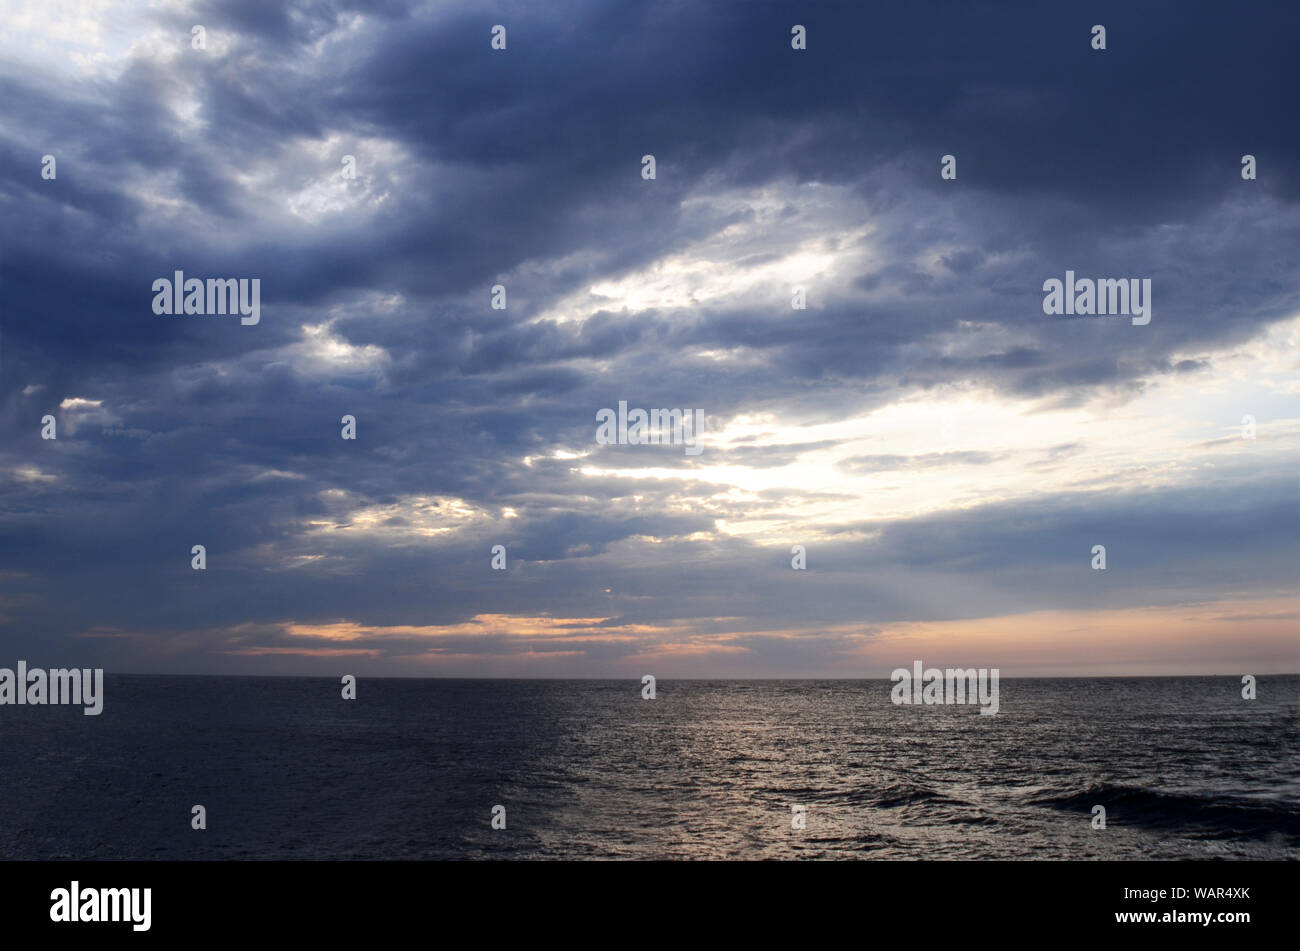 ATLANTIC LIGHTS: June sunrise over the Absecon bay in Atlantic city, New Jersey. Stock Photo